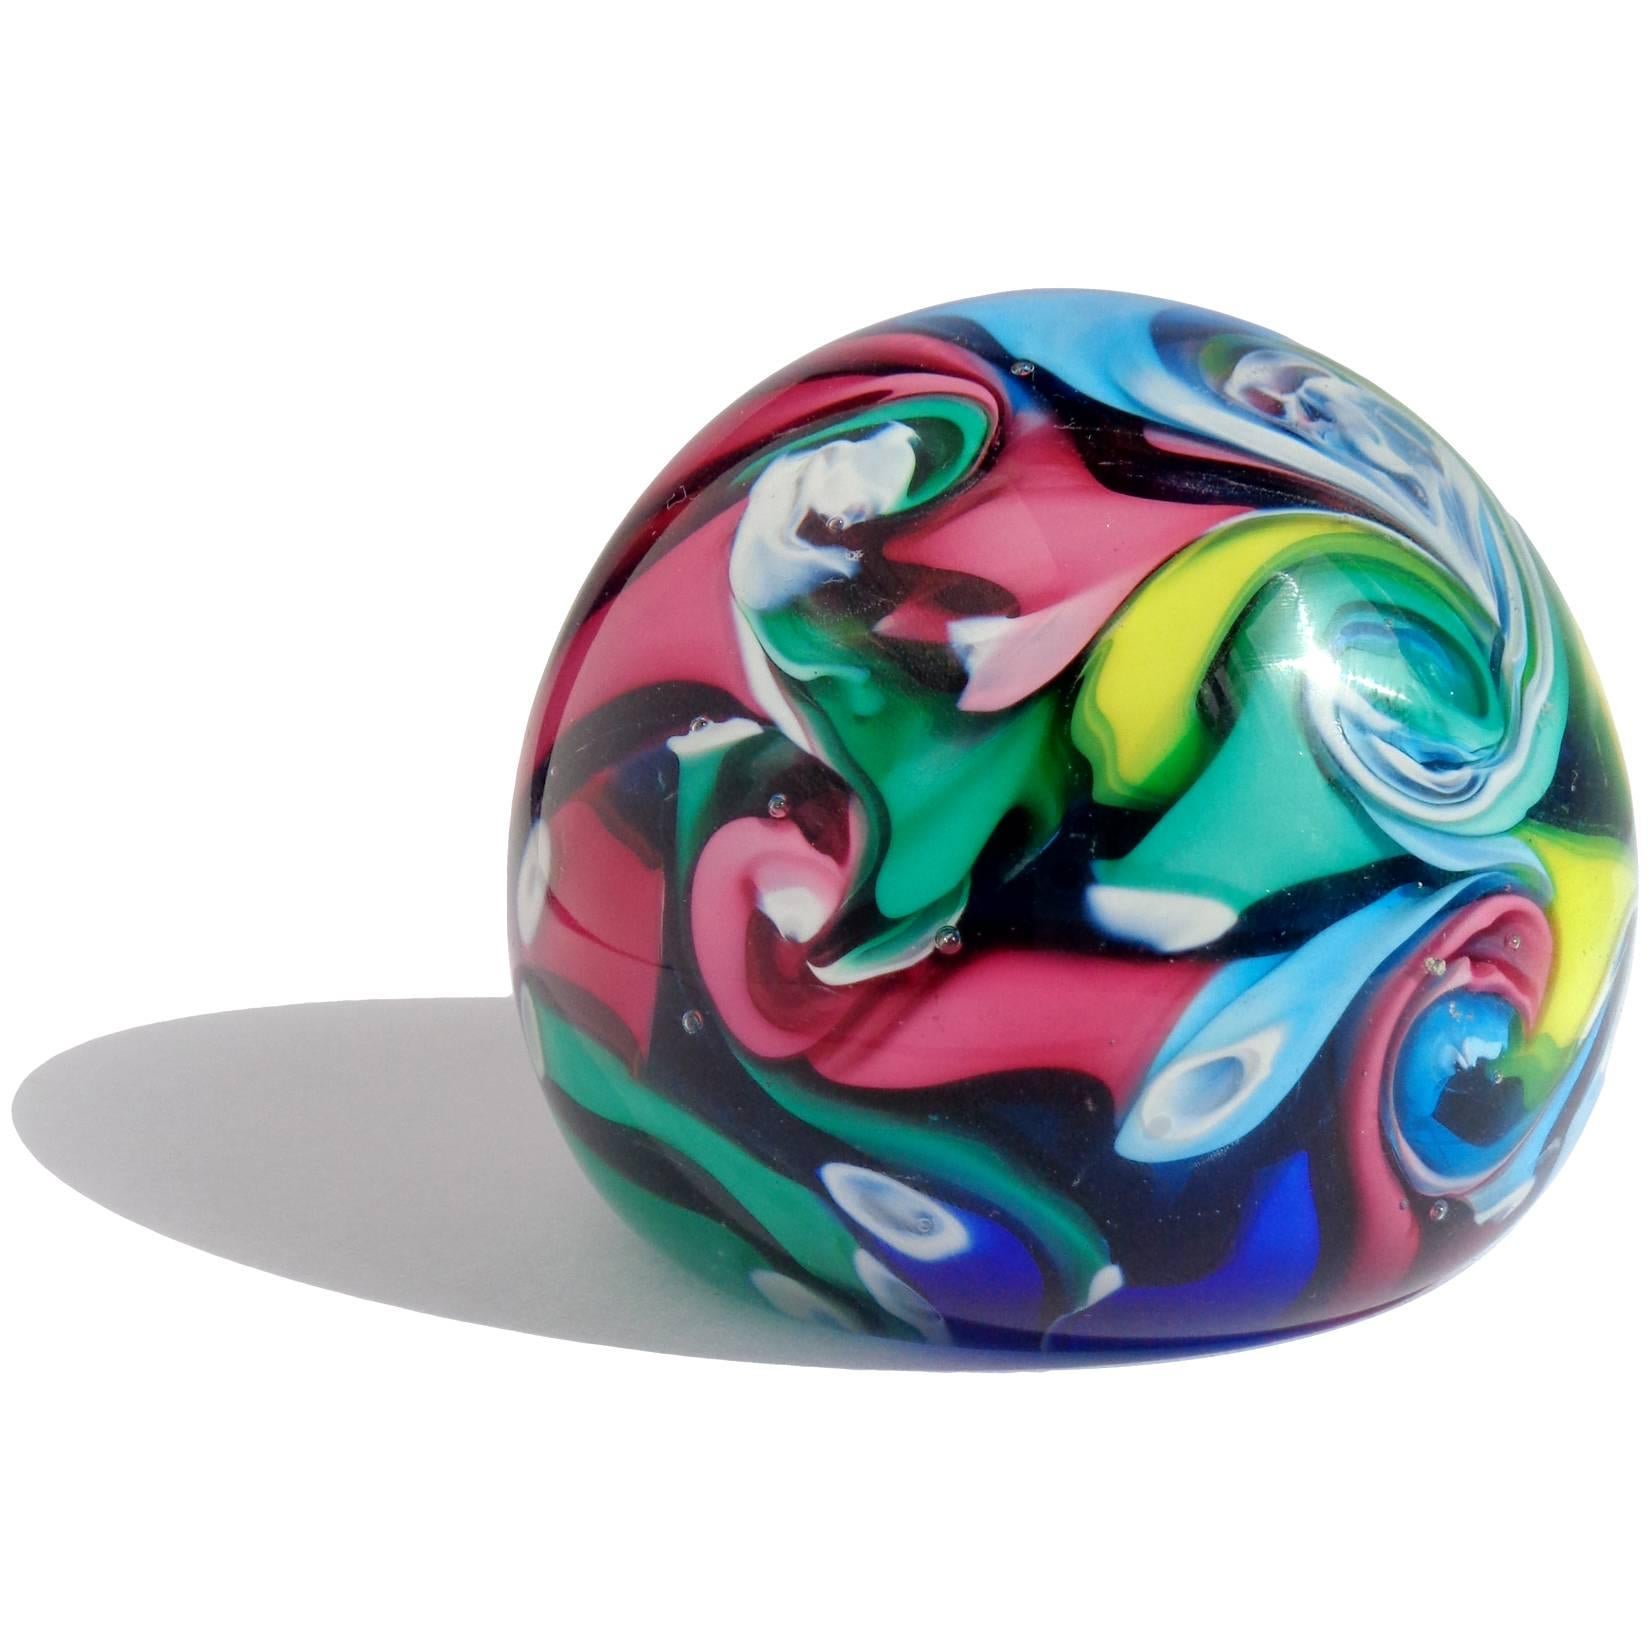 Free shipping worldwide! See details below description.

Beautiful and colorful set of Murano handblown rainbow ribbons, swirling and scrambled Millefori paperweights. Documented to the Fratelli Toso company. The striped and Millefori paperweights